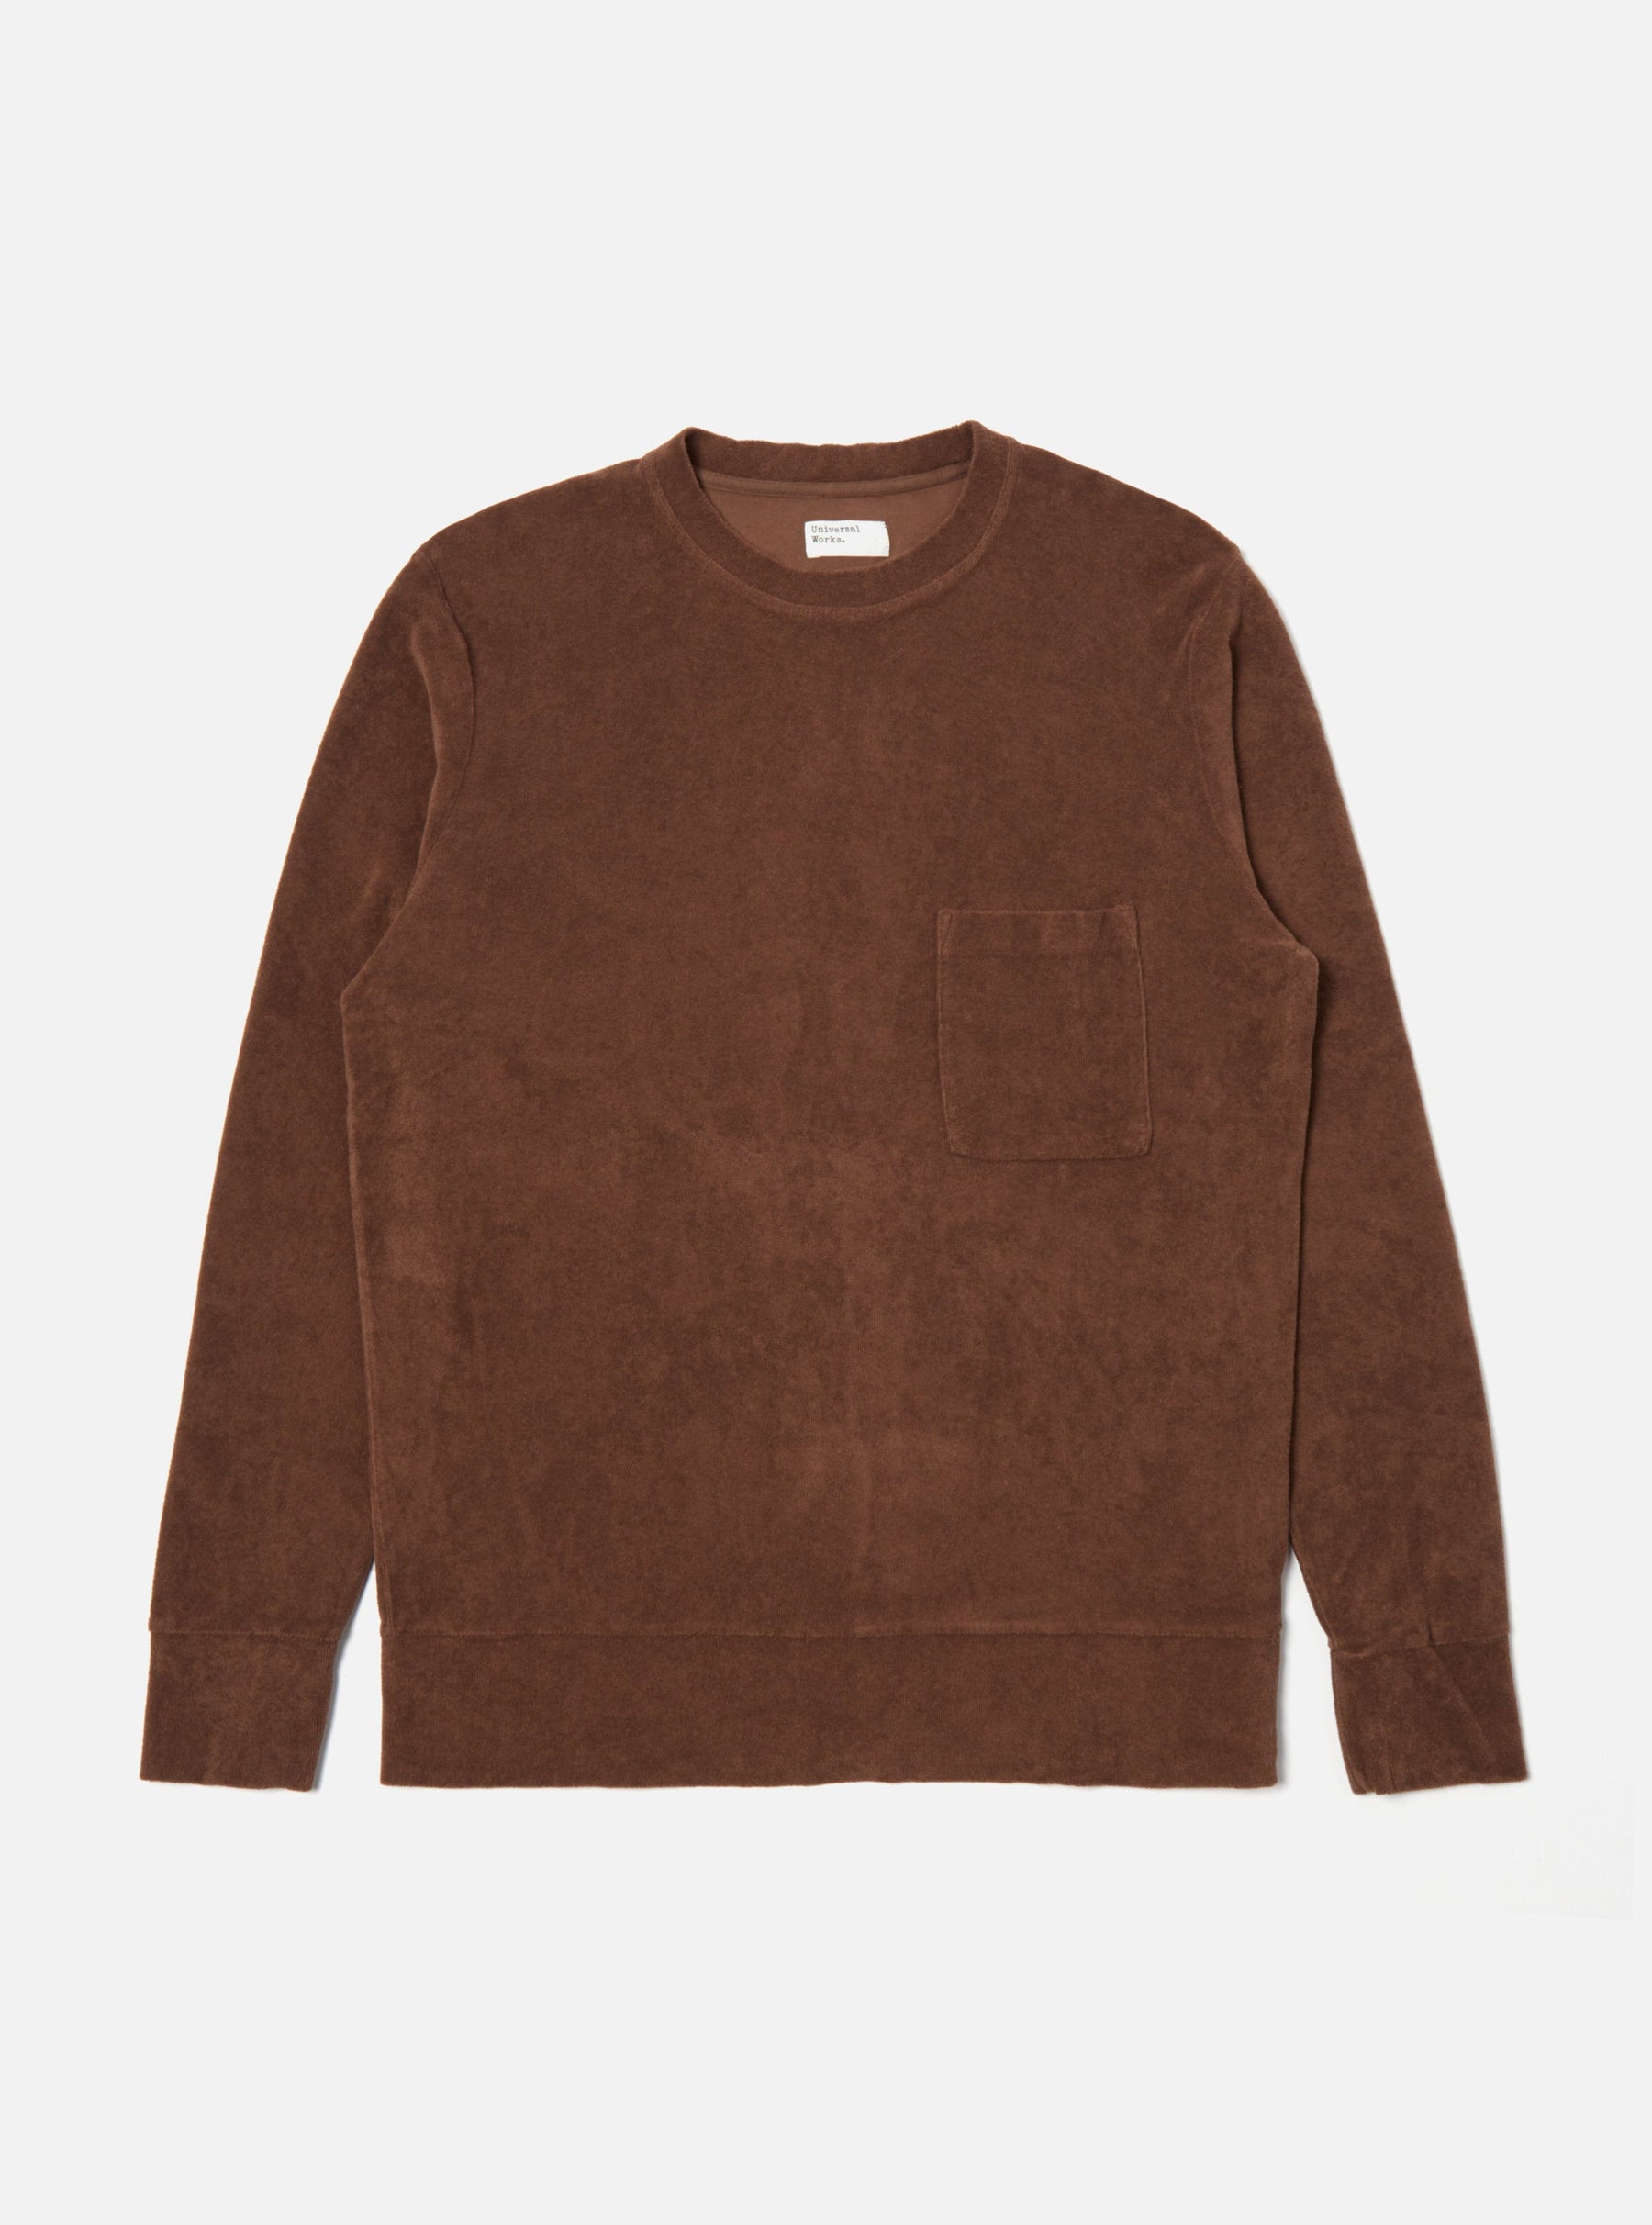 Loose Pullover in Brown Terry Fleece